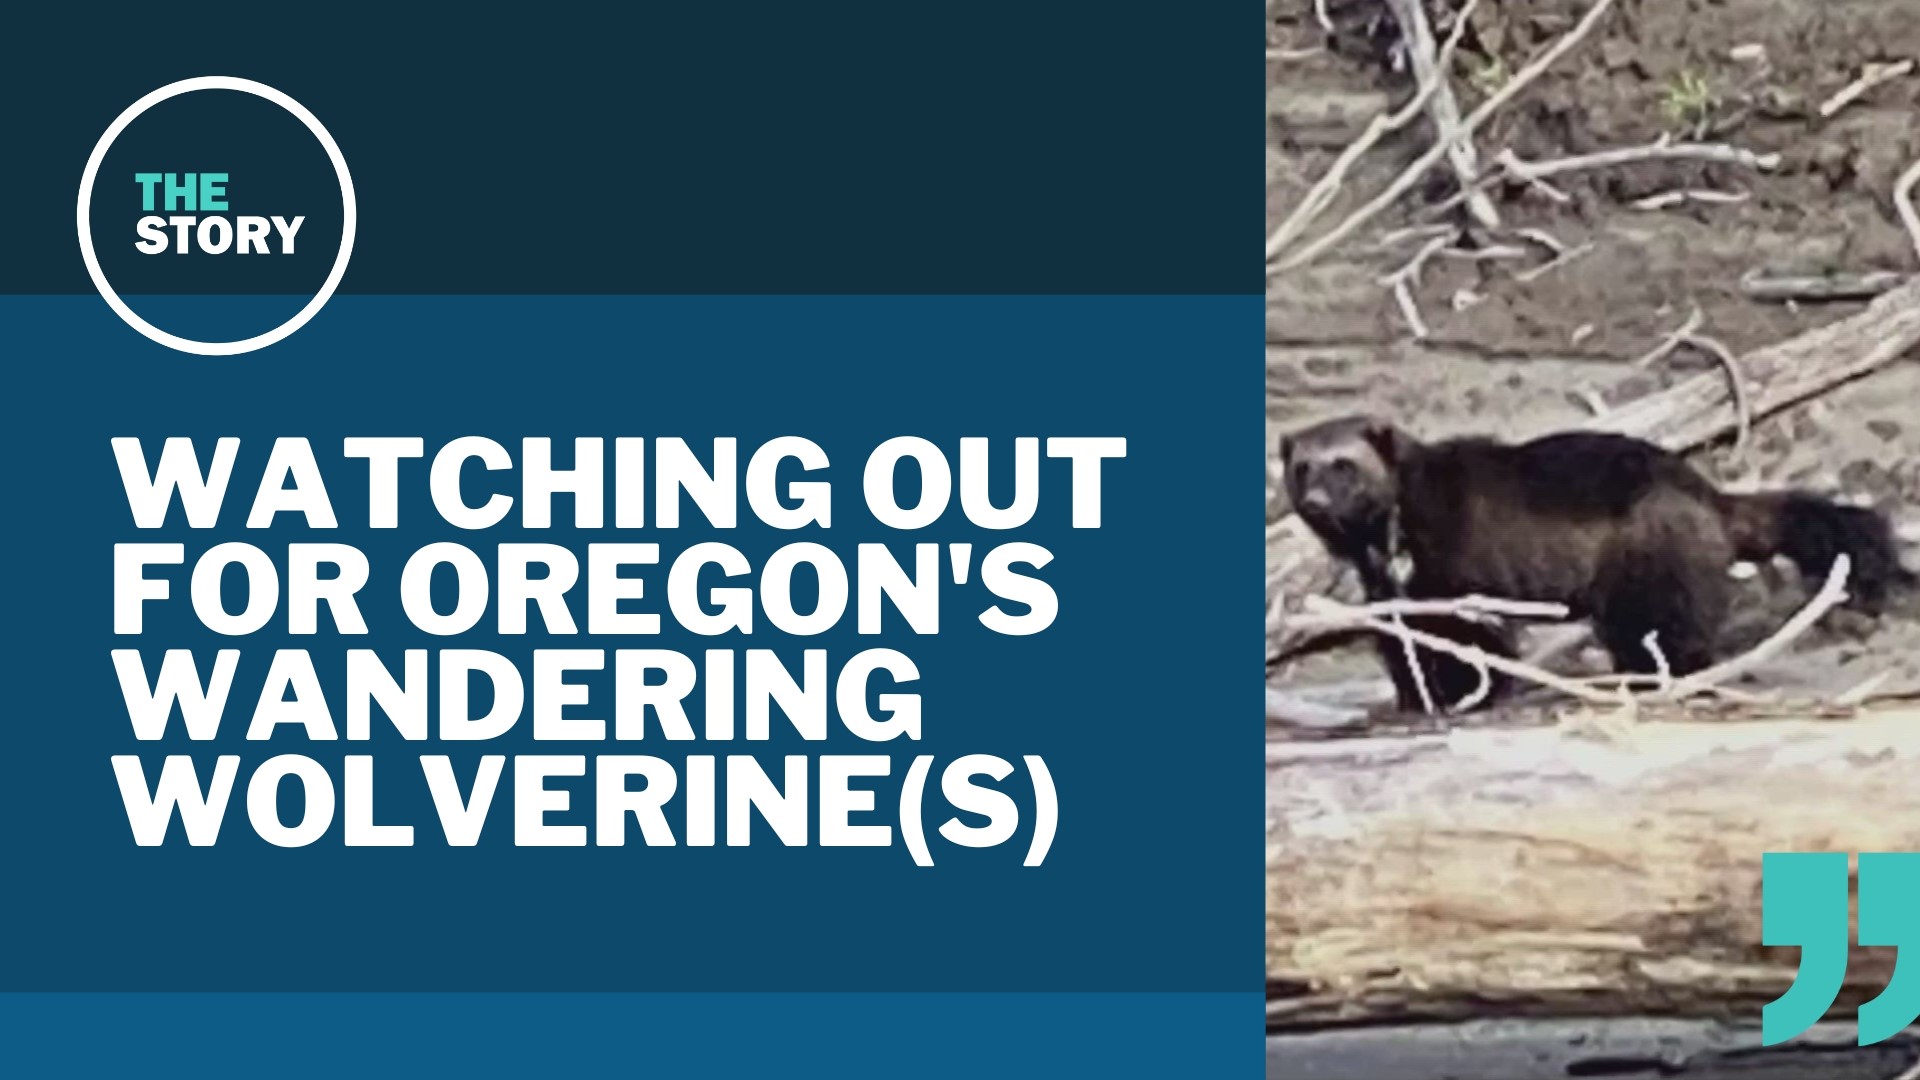 Wolverines haven’t appeared in our region in decades. But recent sightings suggest at least one is checking out the local digs before shuffling on.